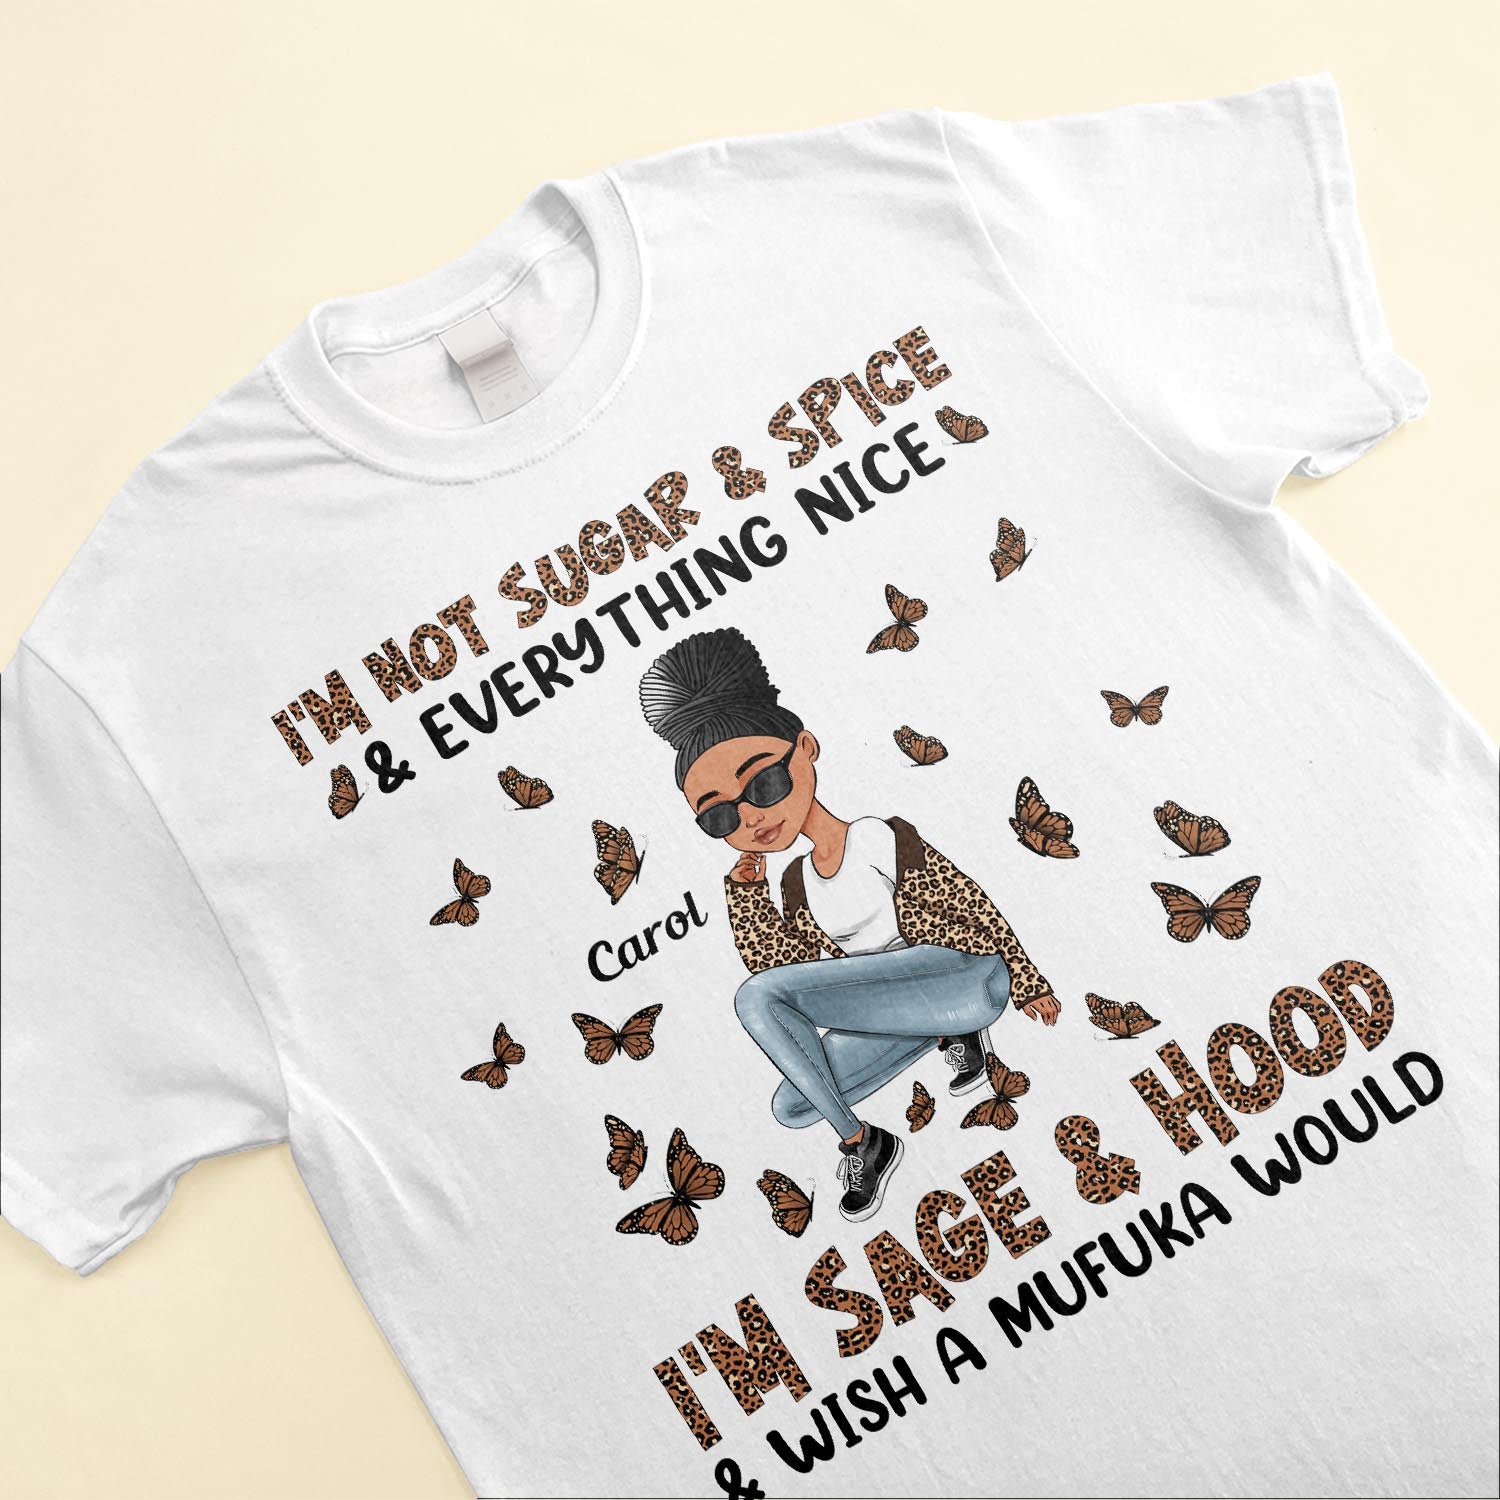 I'm Not Sugar Spice & Everything Nice Leopard Design - Personalized Shirt - Birthday Gift For Sista, Black Woman - Sassy Girls